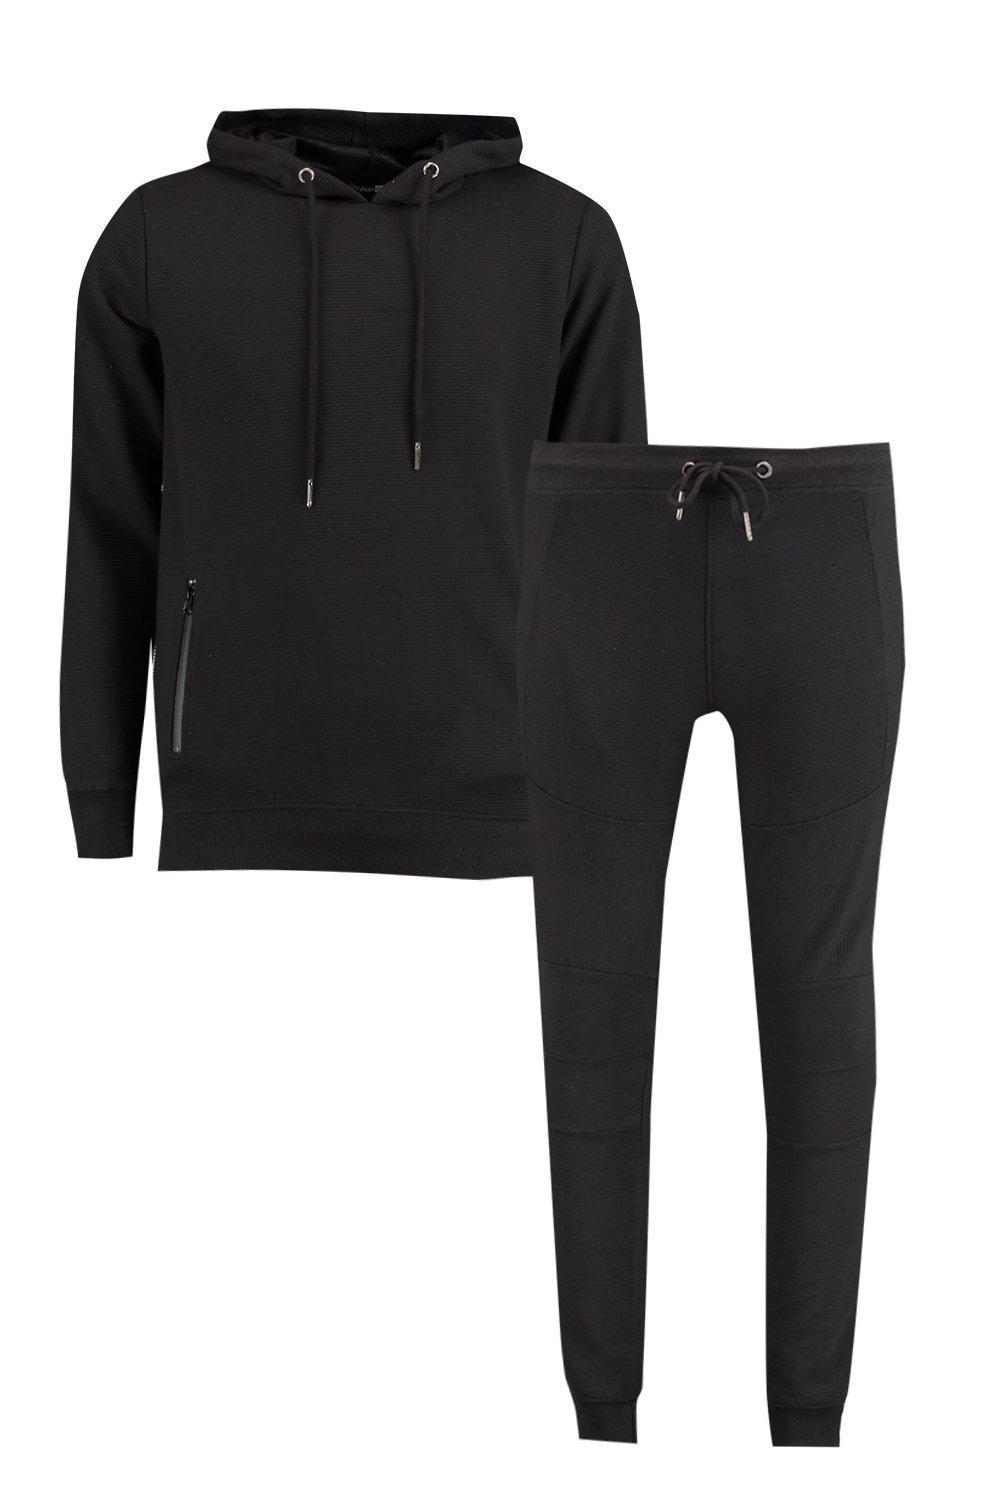 Boohoo Cotton Skinny Fit Ribbed Over The Head Tracksuit in Black for ...